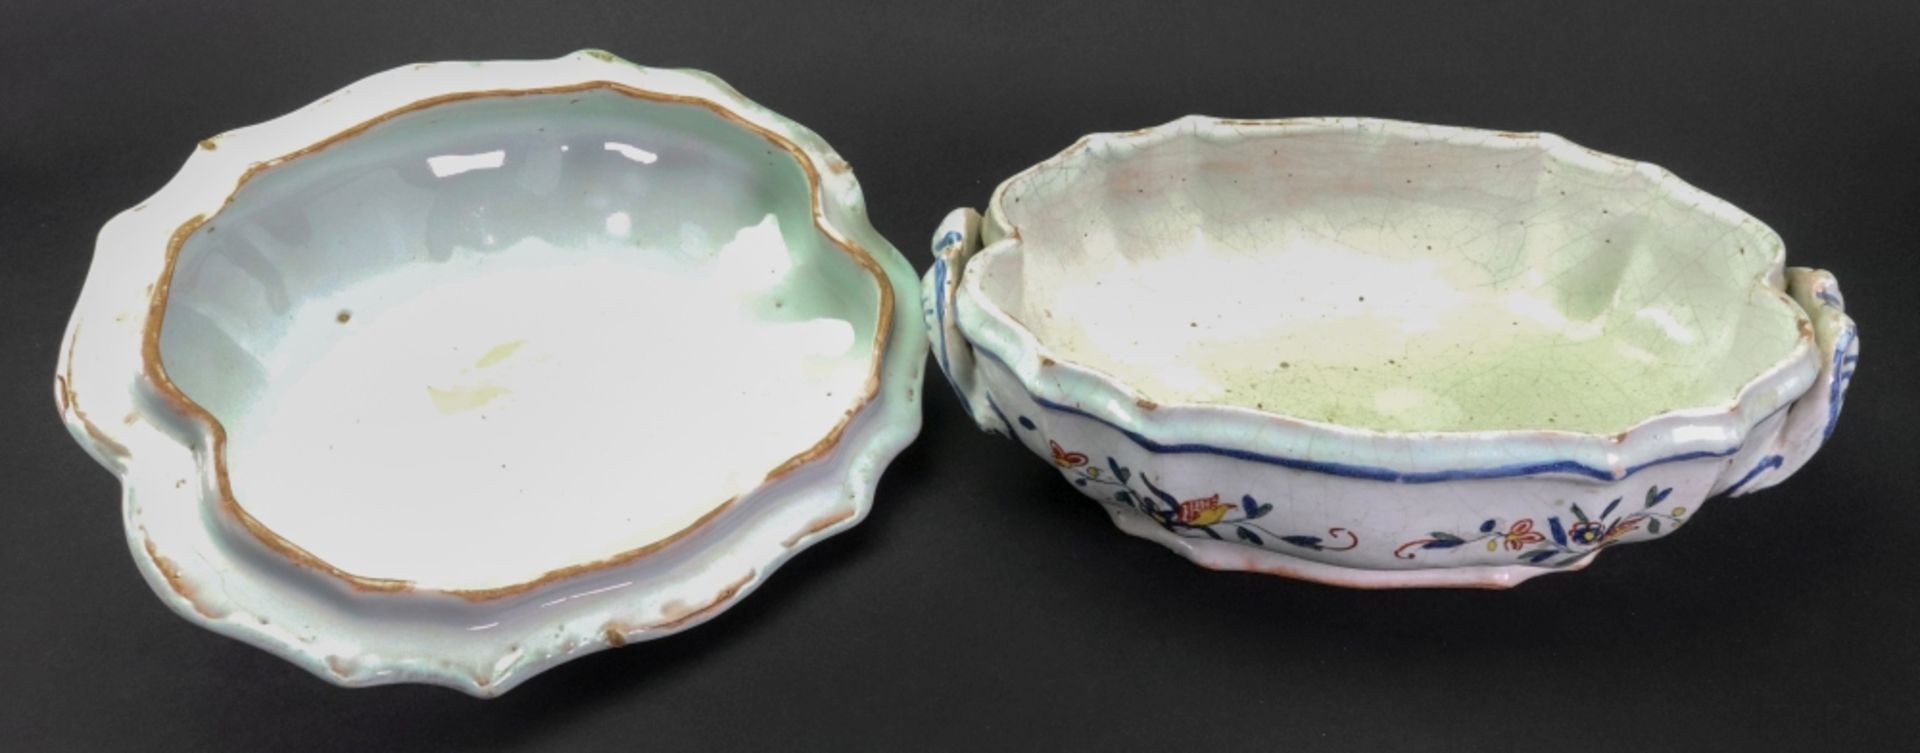 A French Faience polychrome two-handled tureen and cover, 18th century, - Image 2 of 2